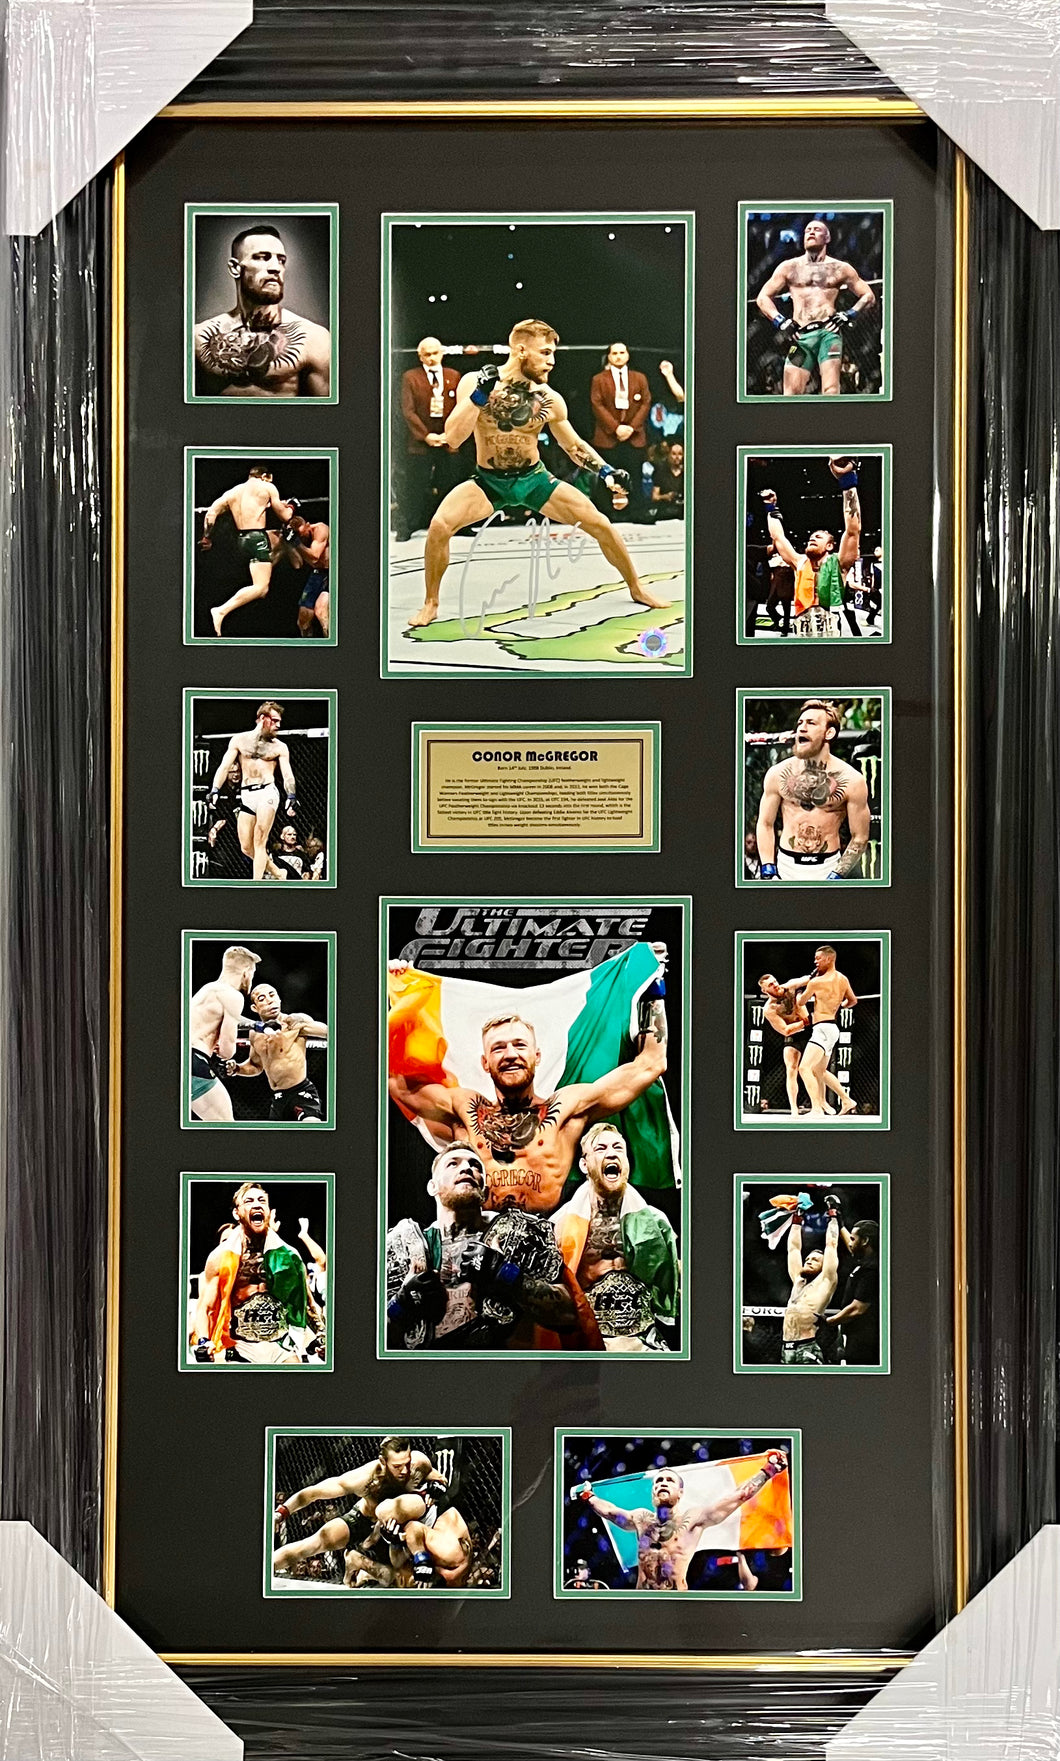 CONOR McGREGOR Signed Photo Collage Display